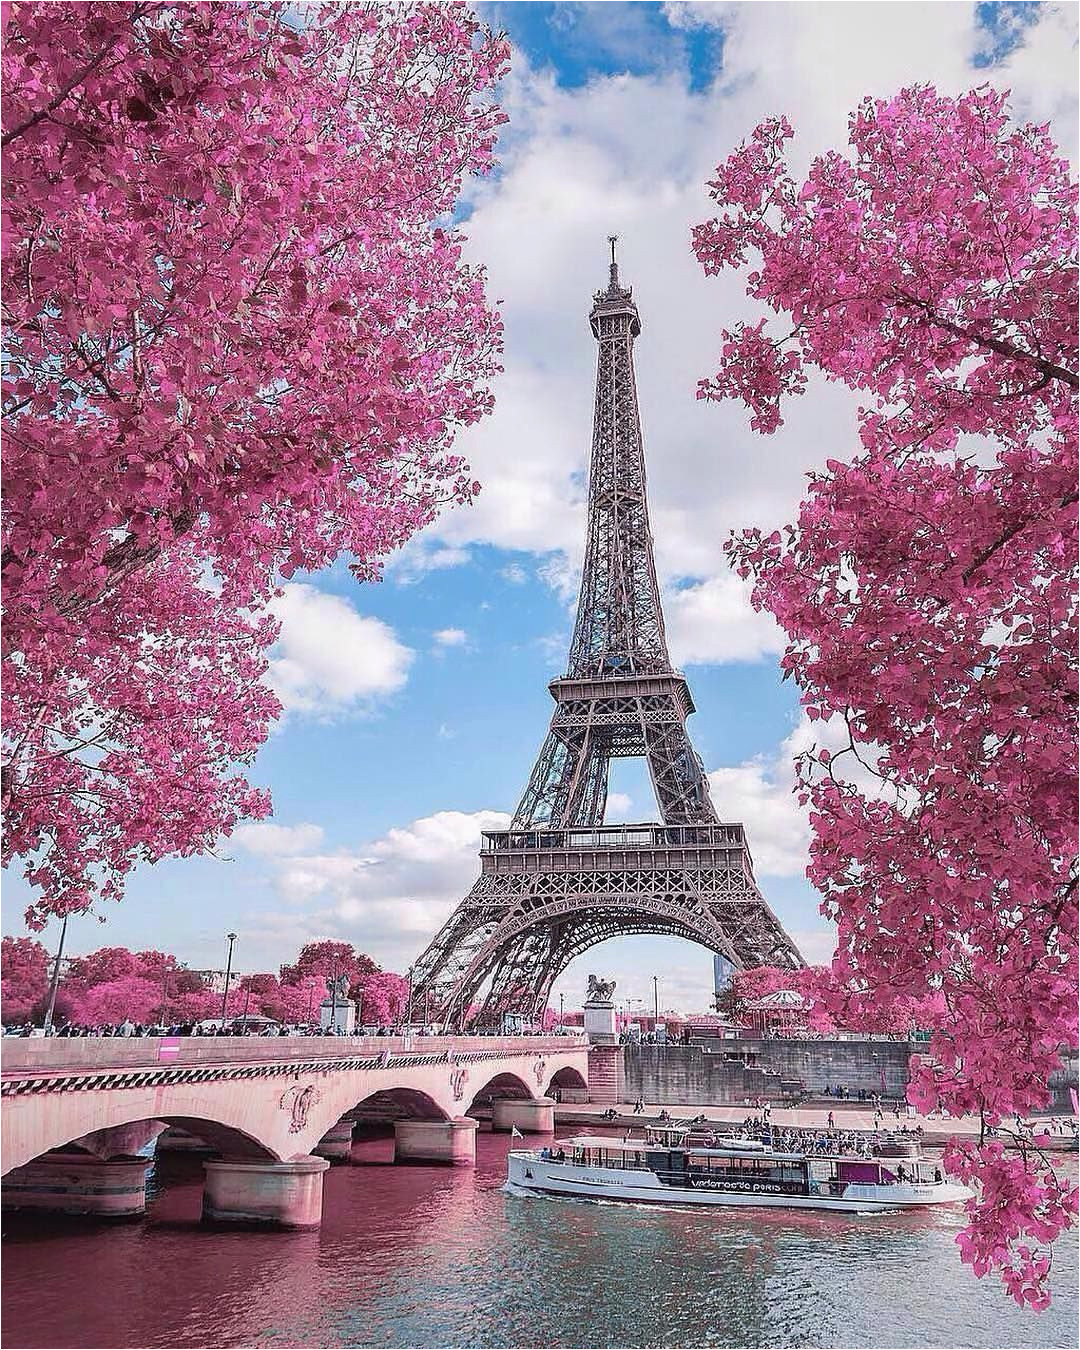 pink view at eiffel tower d paris france photo by kyrenian